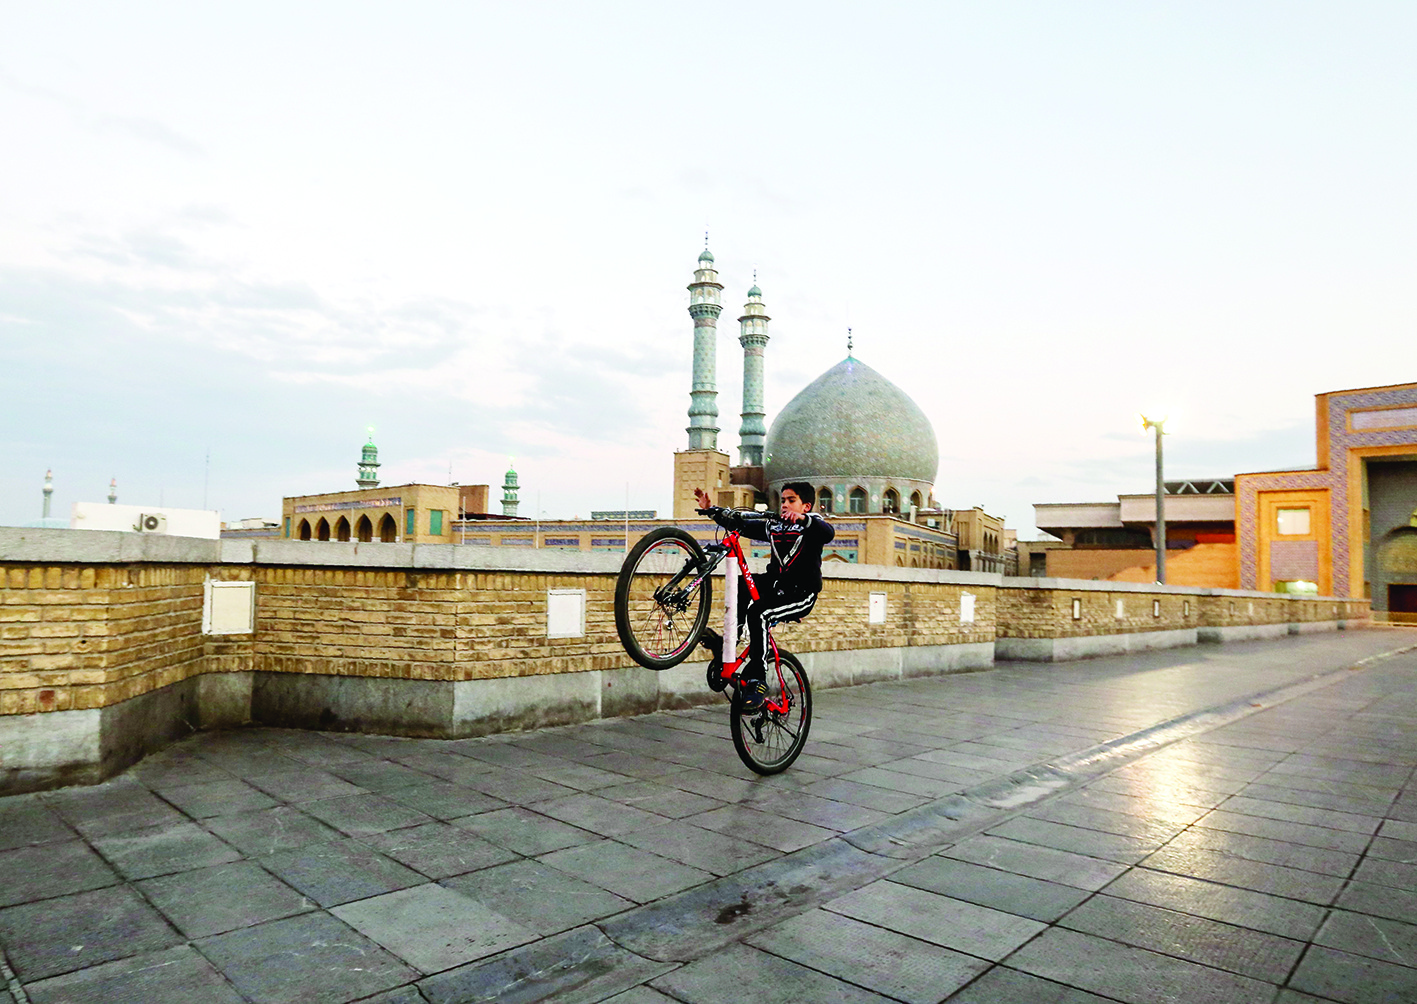 (FILES) This file photo taken on January 14, 2019 shows a child rides his bicycle near the Fatima Masumeh shrine in the holy city of Qom, about 130 kilometres south of the capital Tehran. - Iran closed four key Shiite pilgrimage sites across the Islamic republic on Monday in line with measures to stop the spread of the new coronavirus, state media reported. (Photo by ATTA KENARE / AFP)